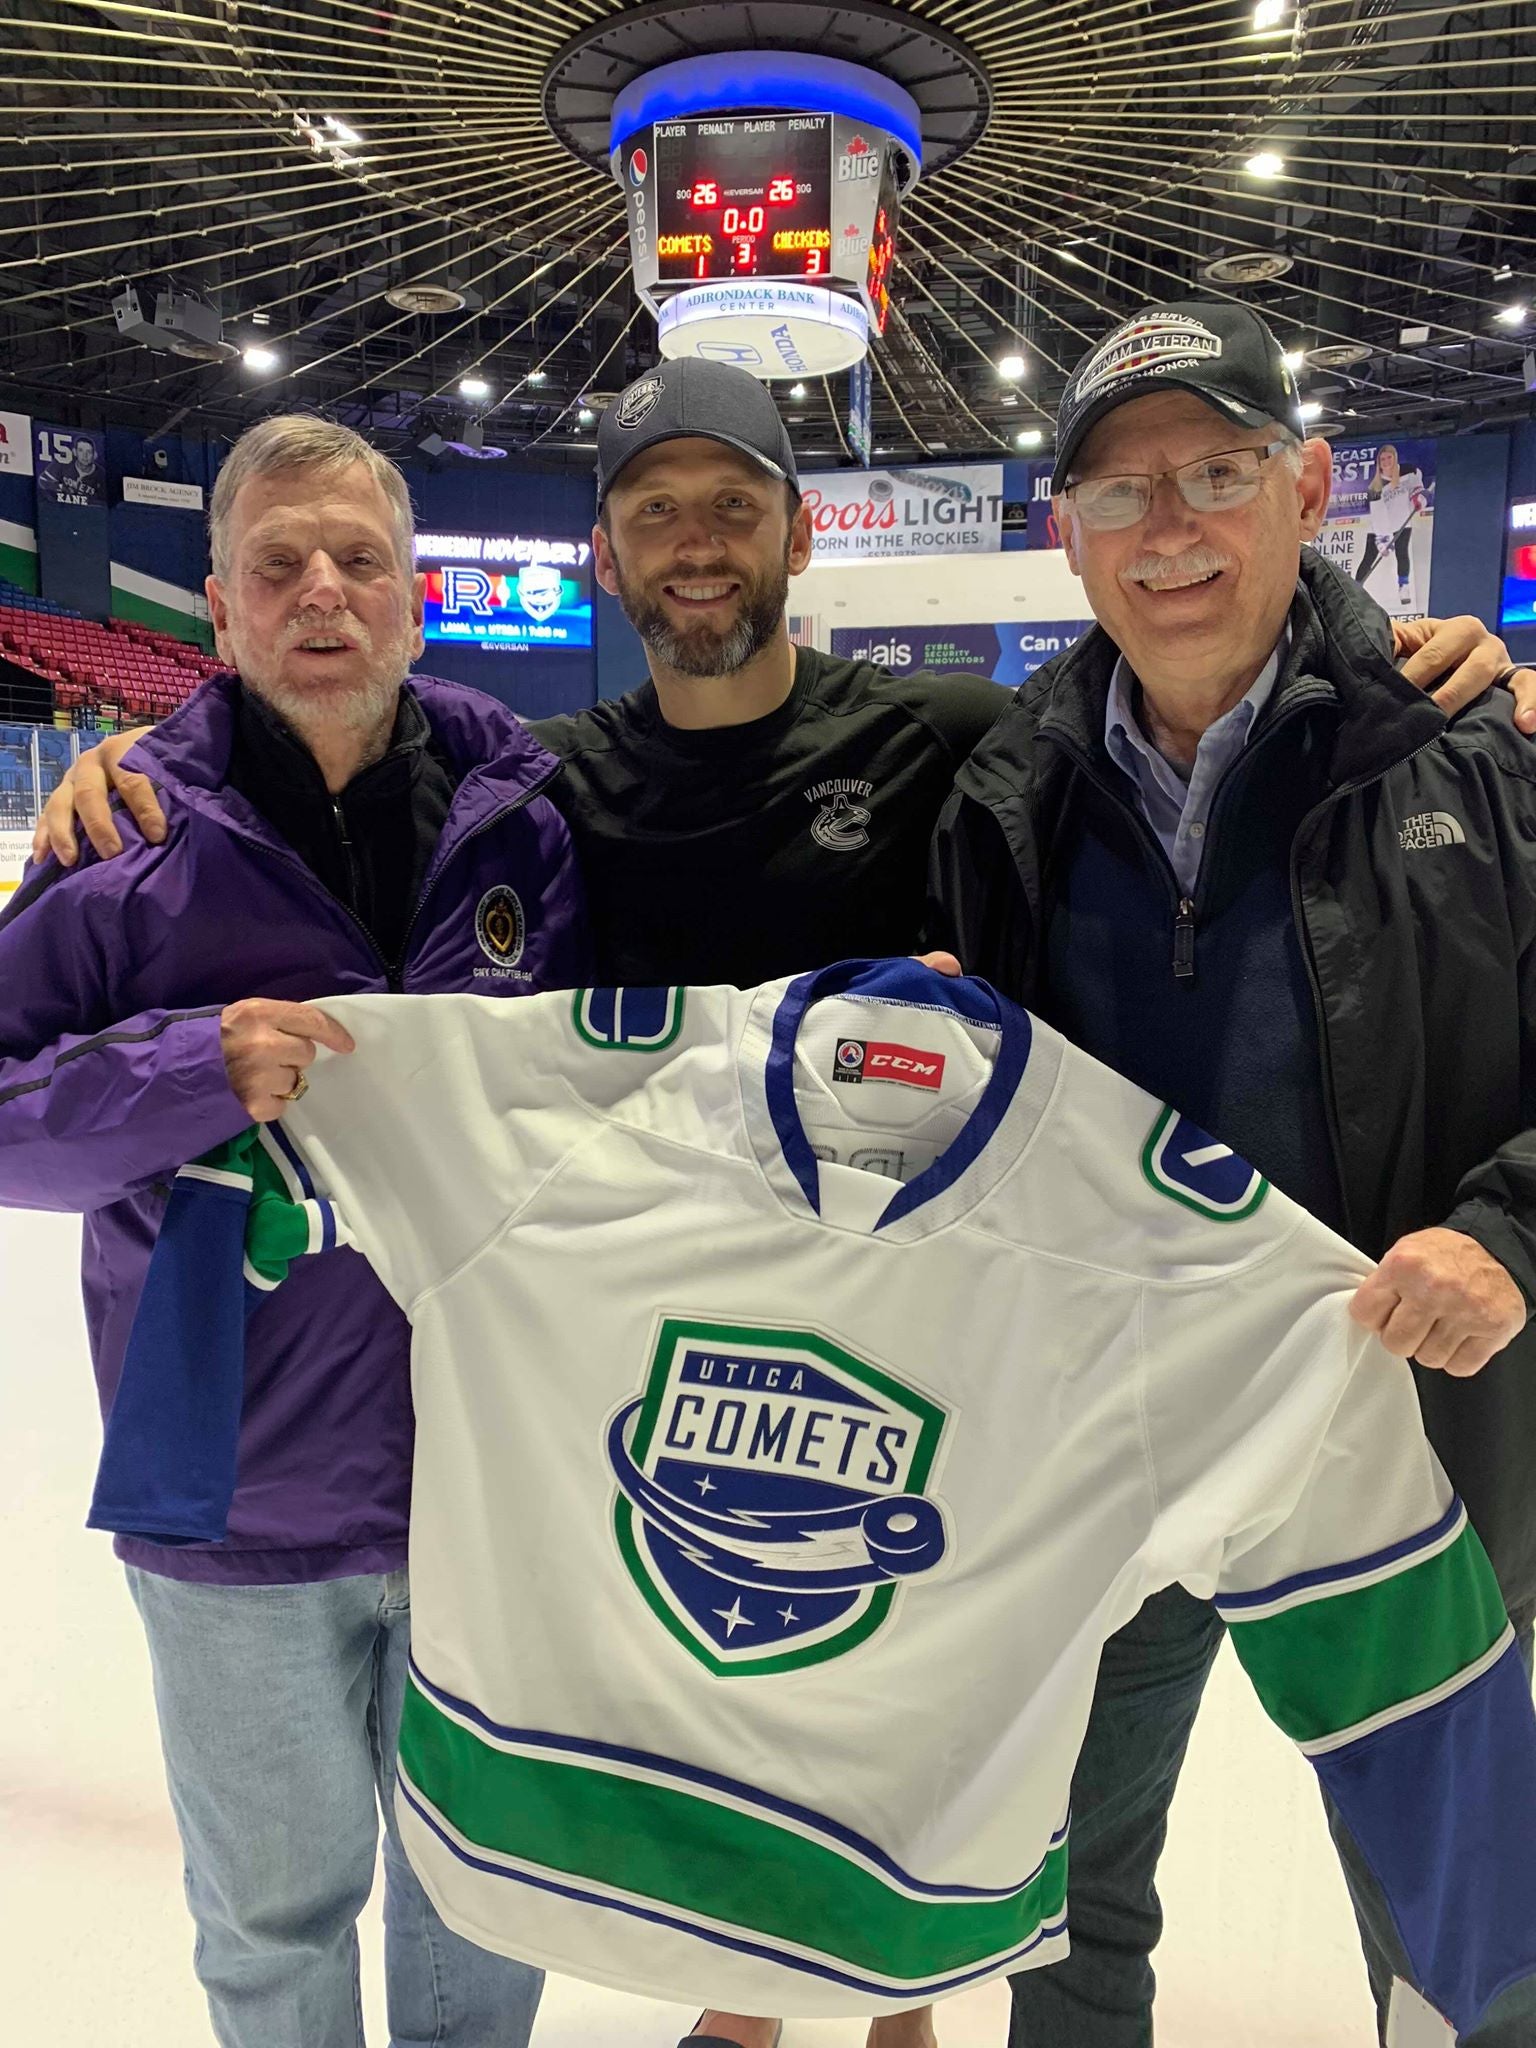 Comets recognized as first Purple Heart Hockey Club